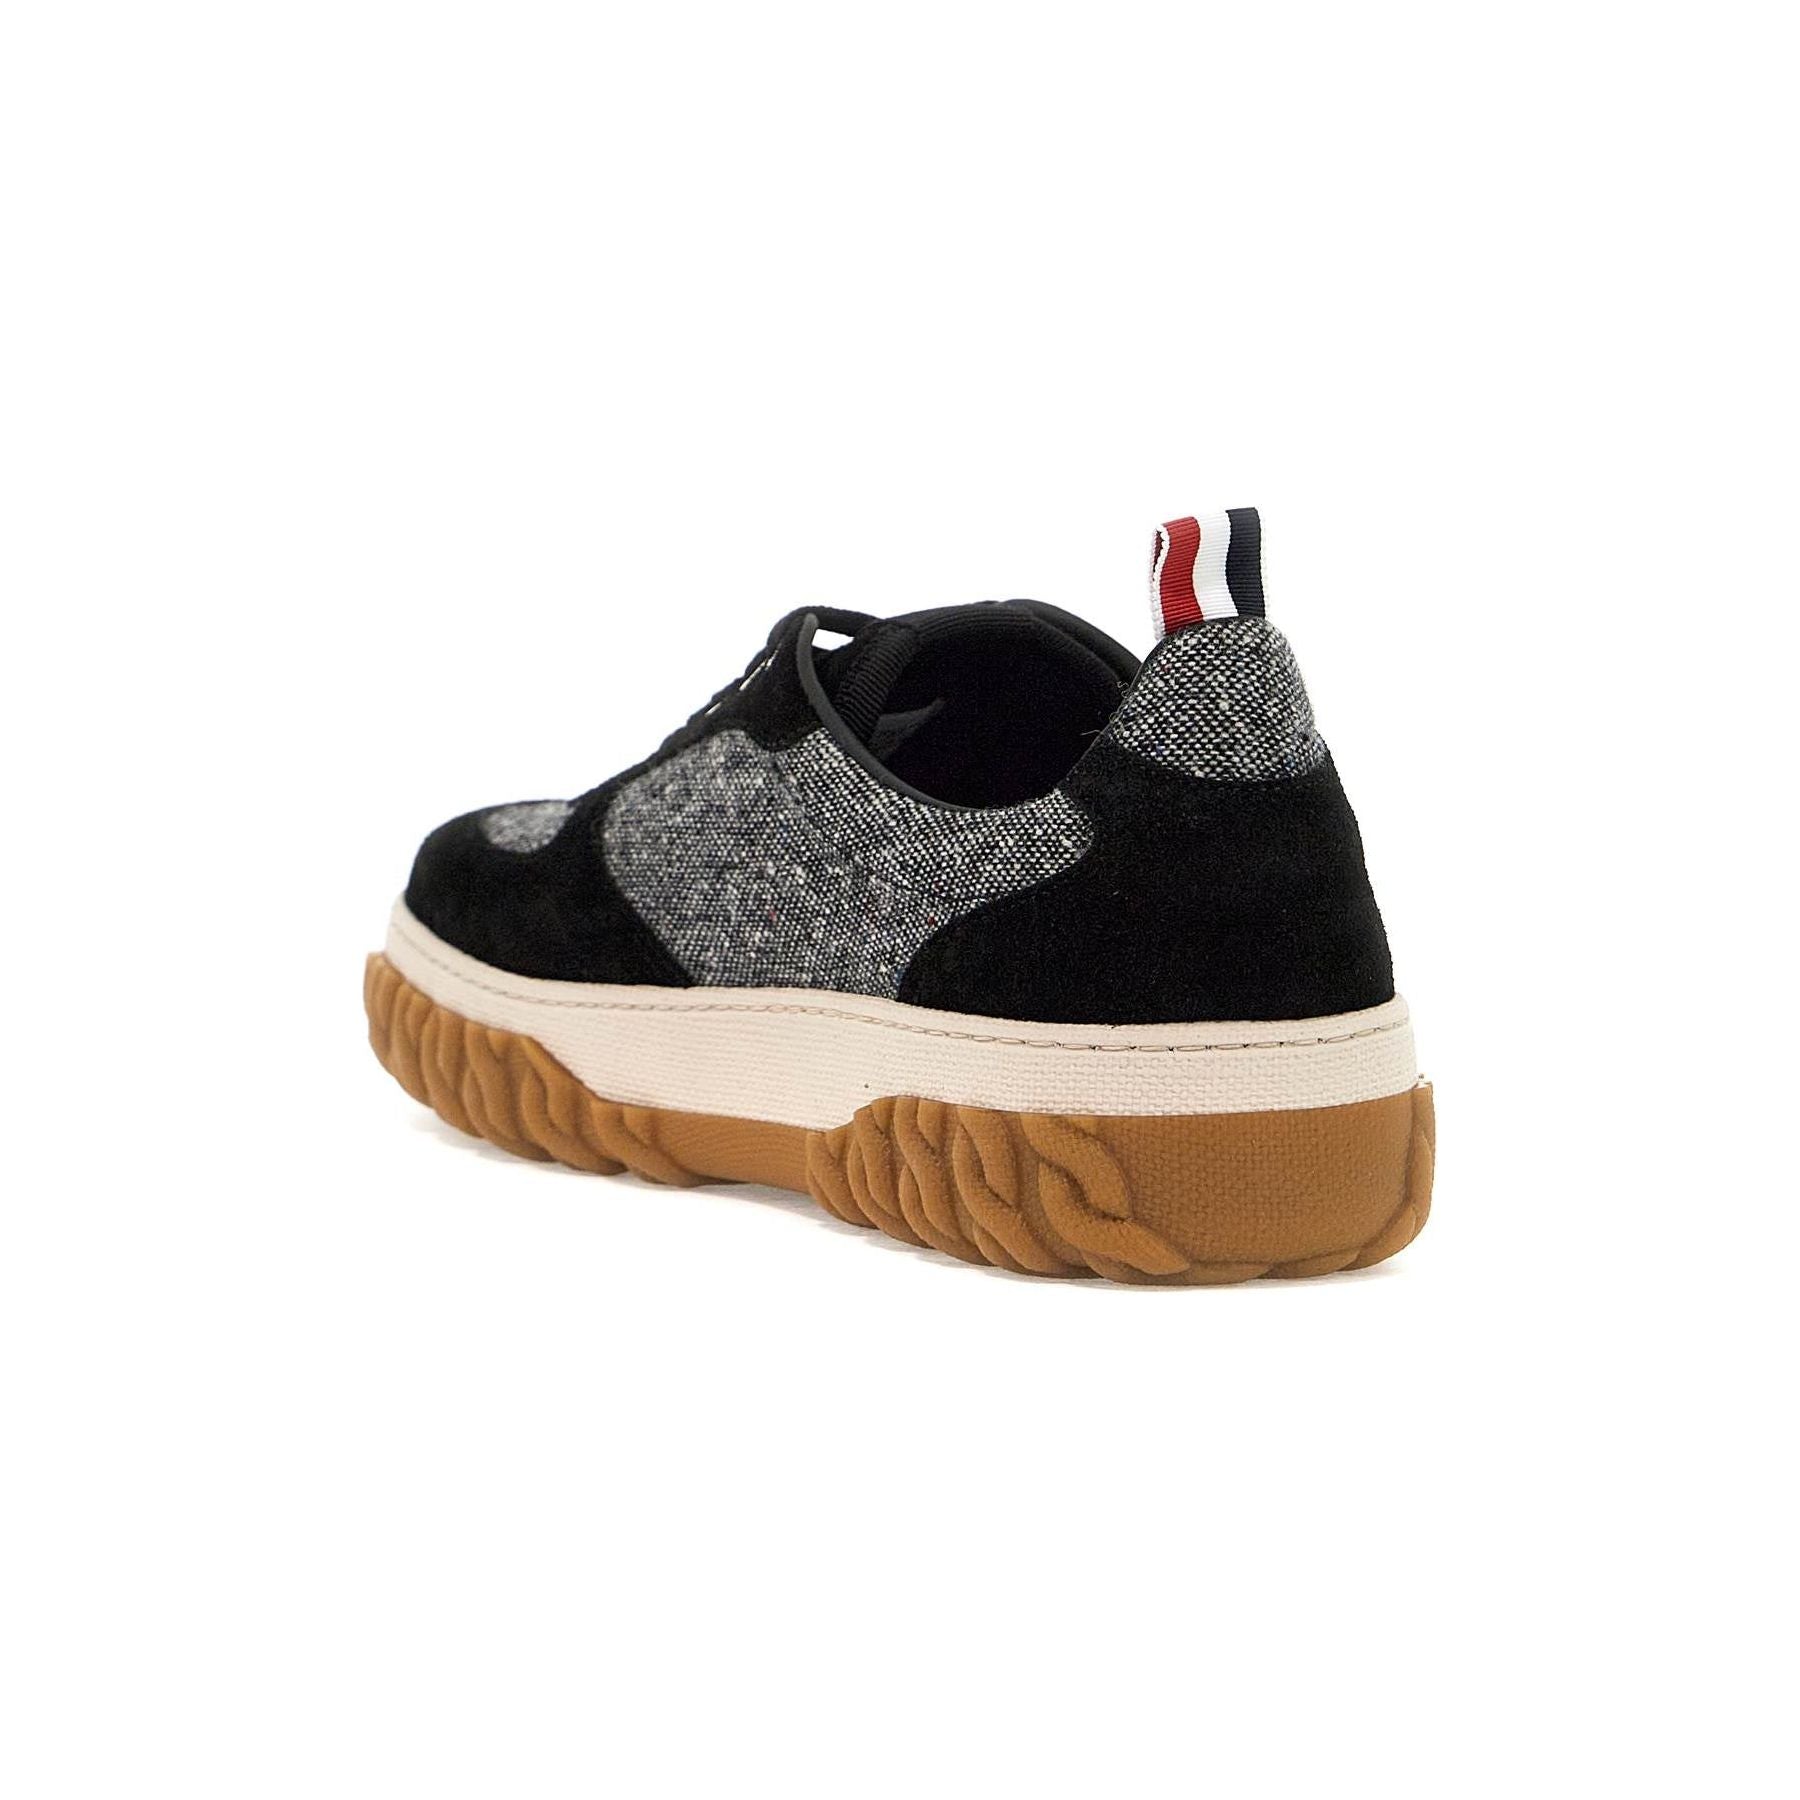 Donegal Tweed Cable Knit Sole Letterman Sneakers